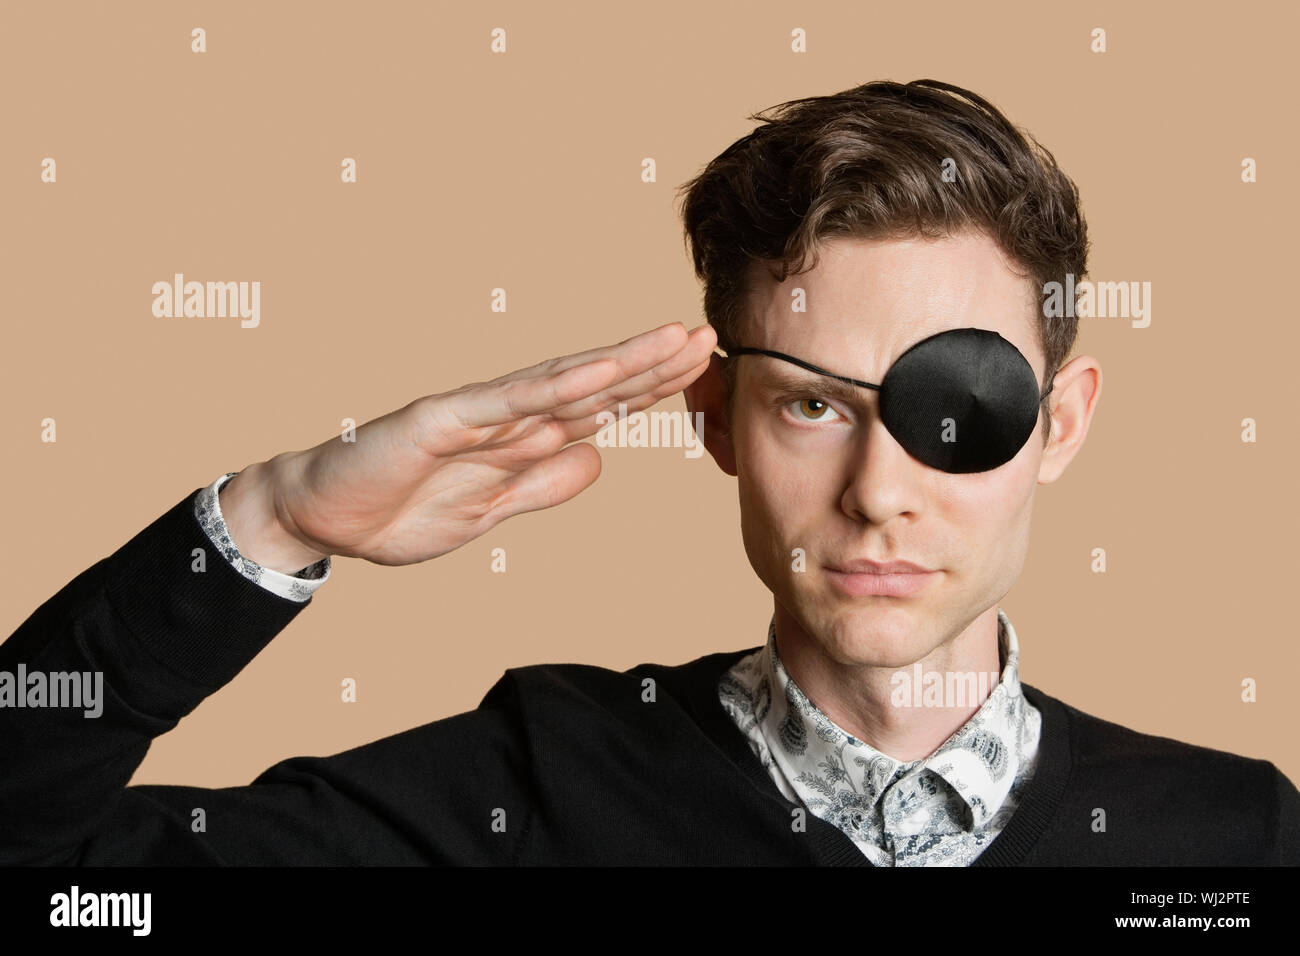 Portrait of a man wearing eye patch saluting over colored background Stock  Photo - Alamy